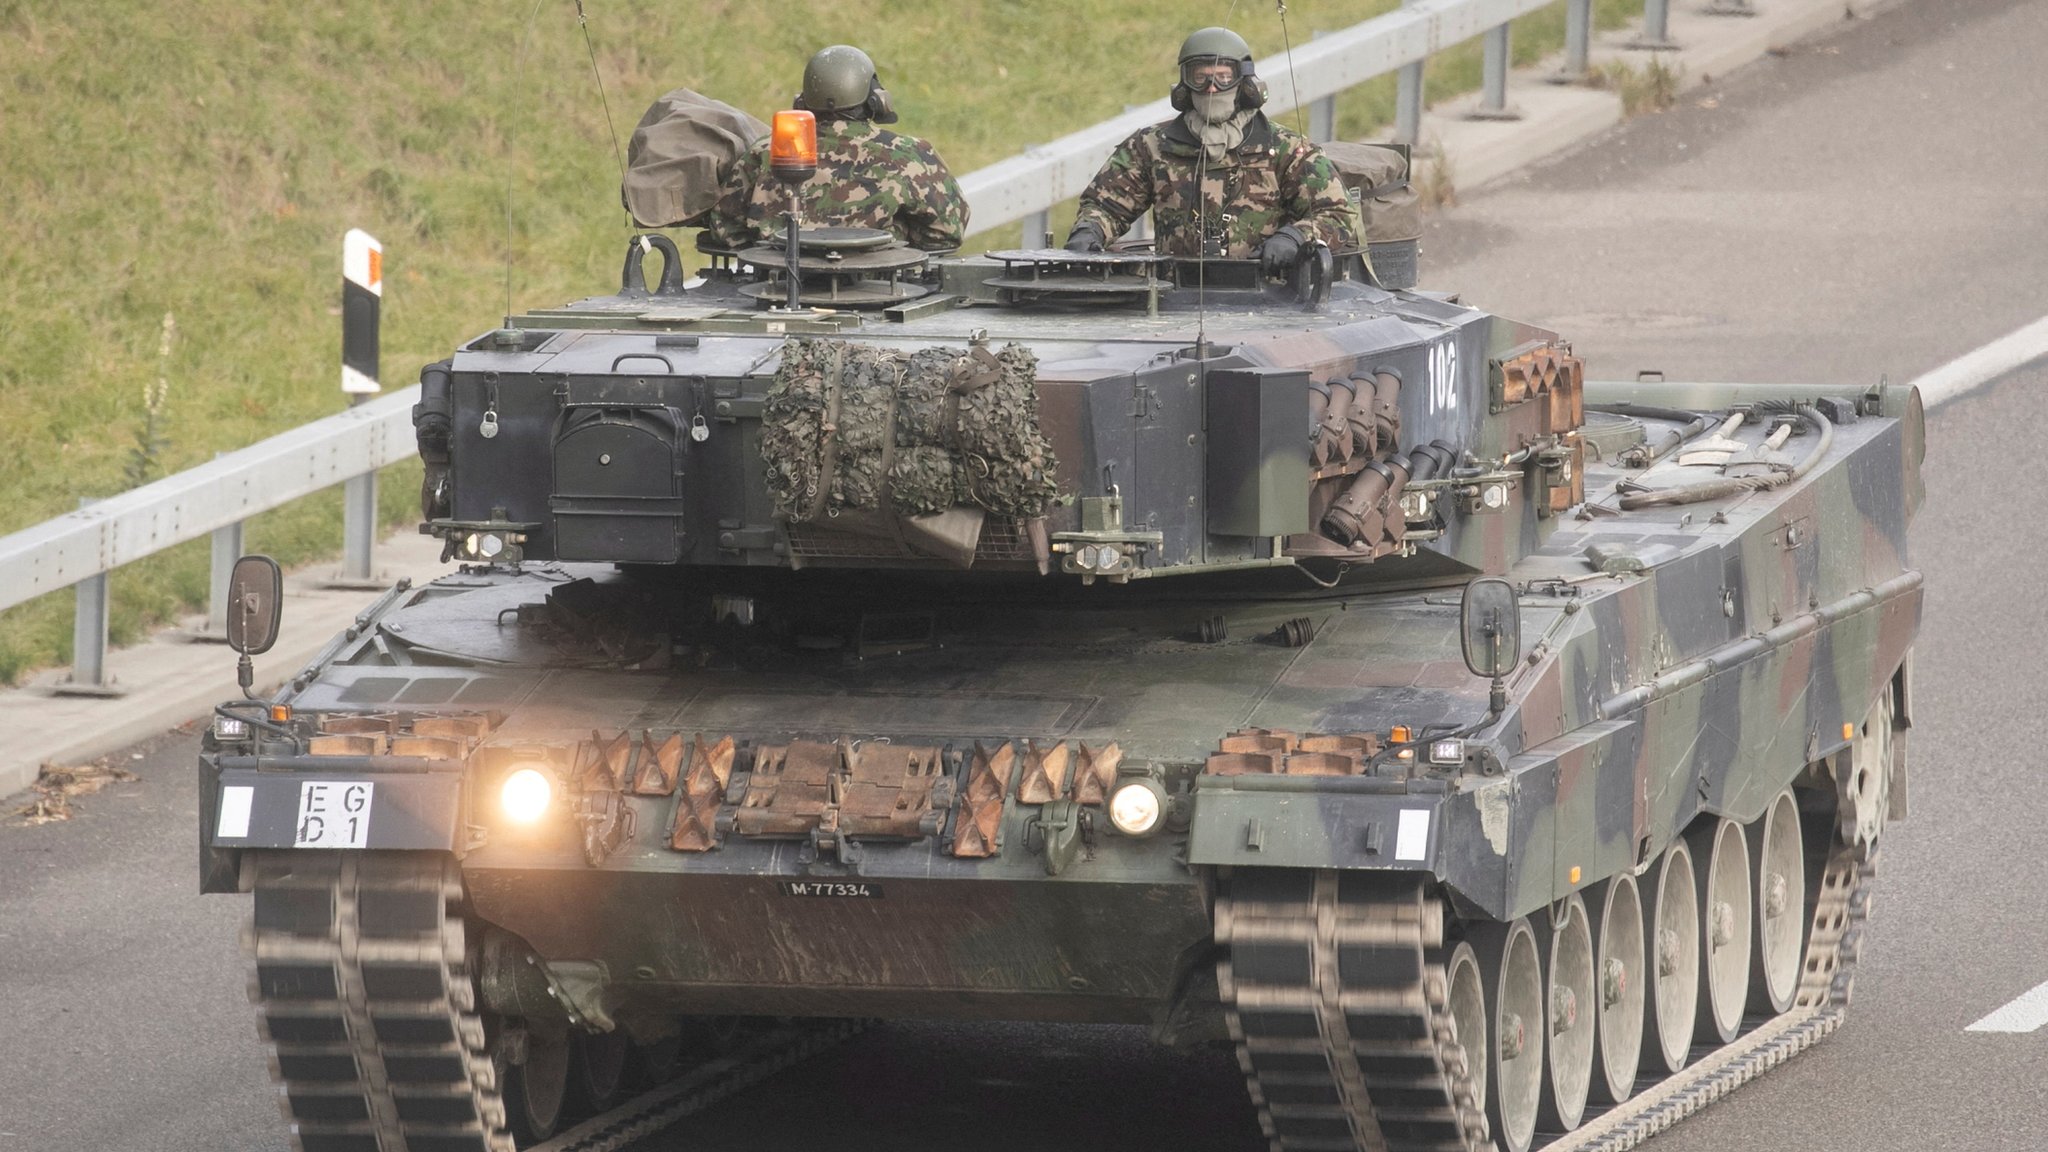 Germany confirms it will provide Ukraine with Leopard 2 tanks